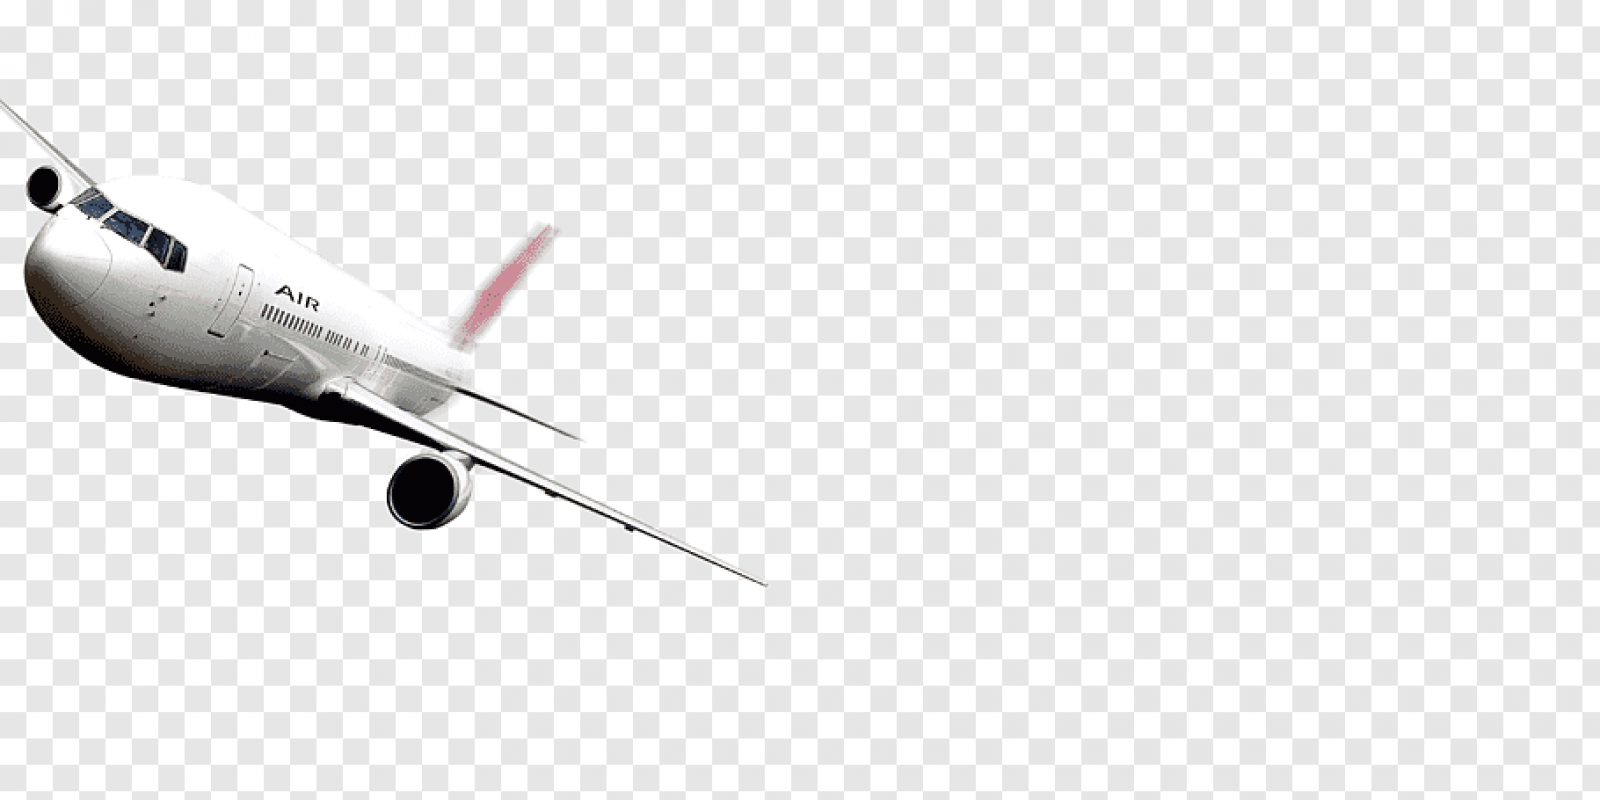 airplane-aircraft-aviation-global-travel-background-png-clip-art